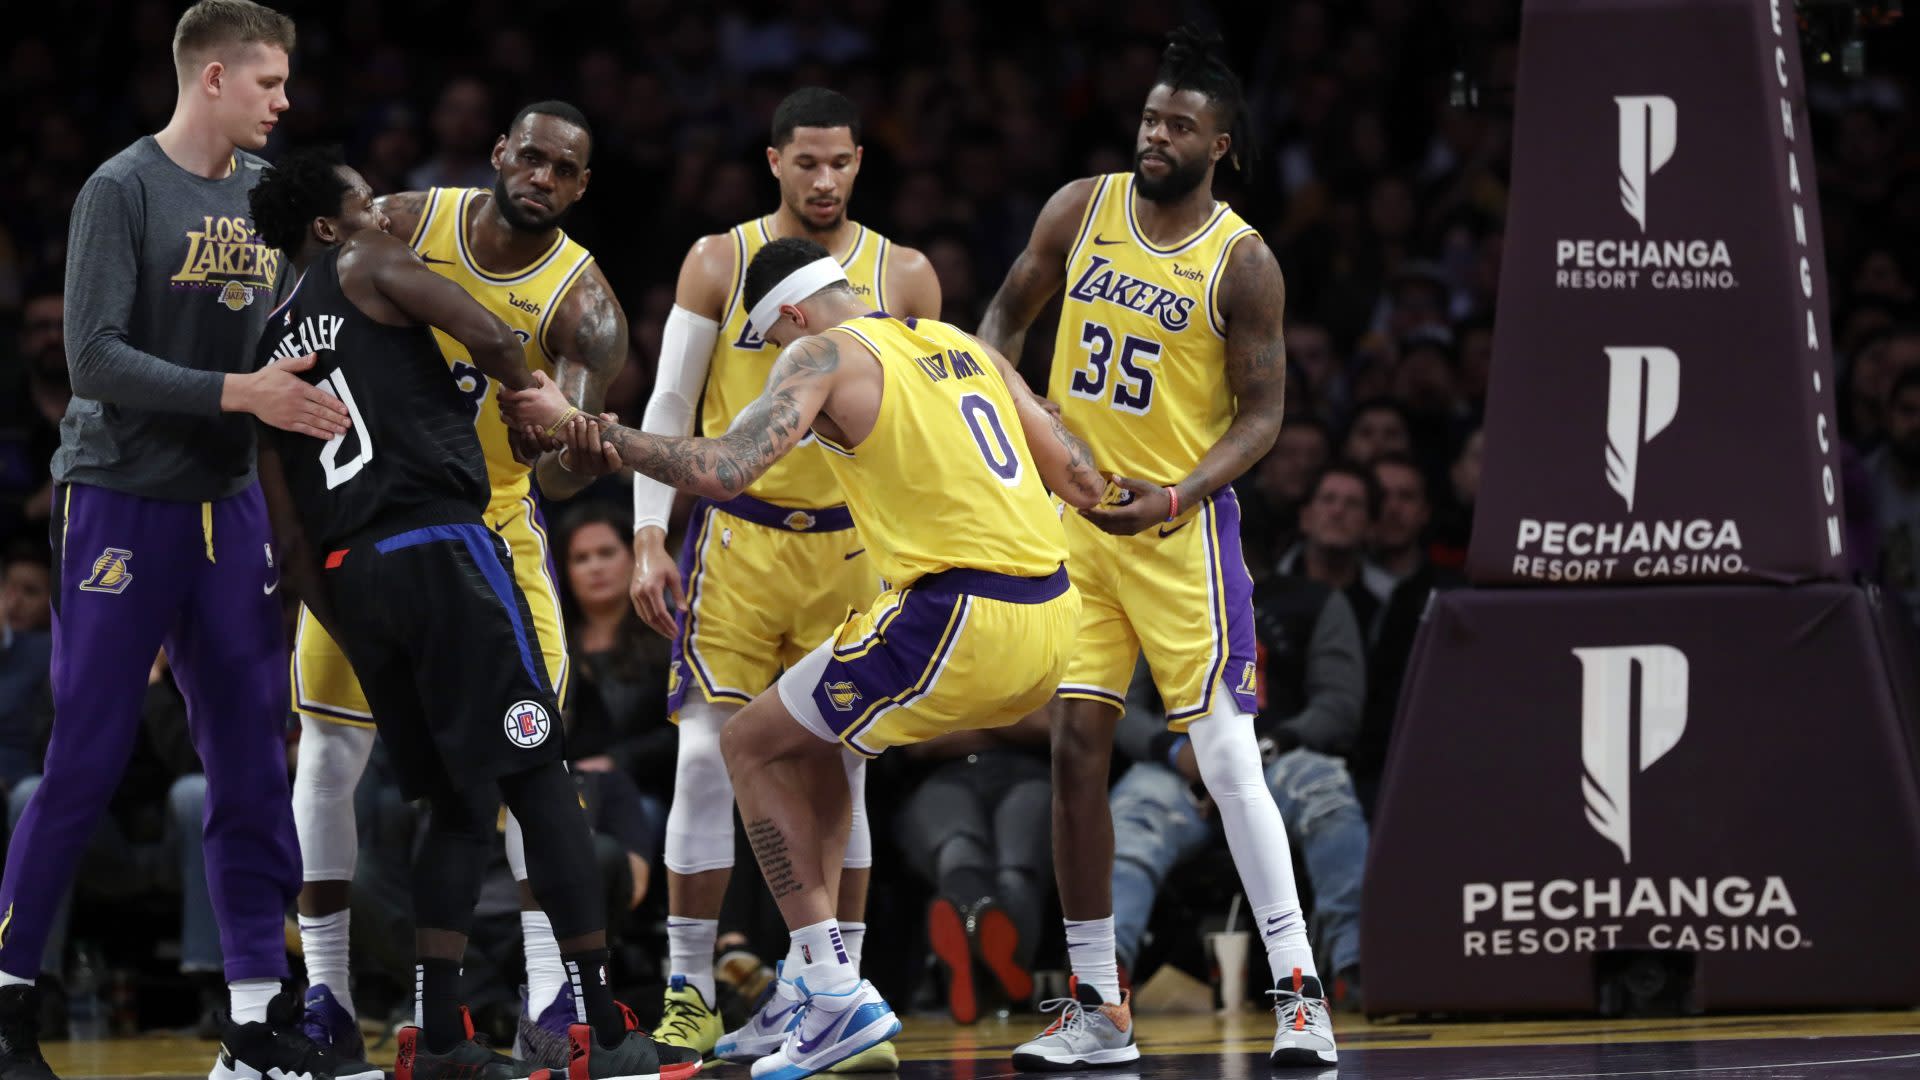 Mri On Kyle Kuzma S Ankle Comes Back Clean Could Miss Up To A Week